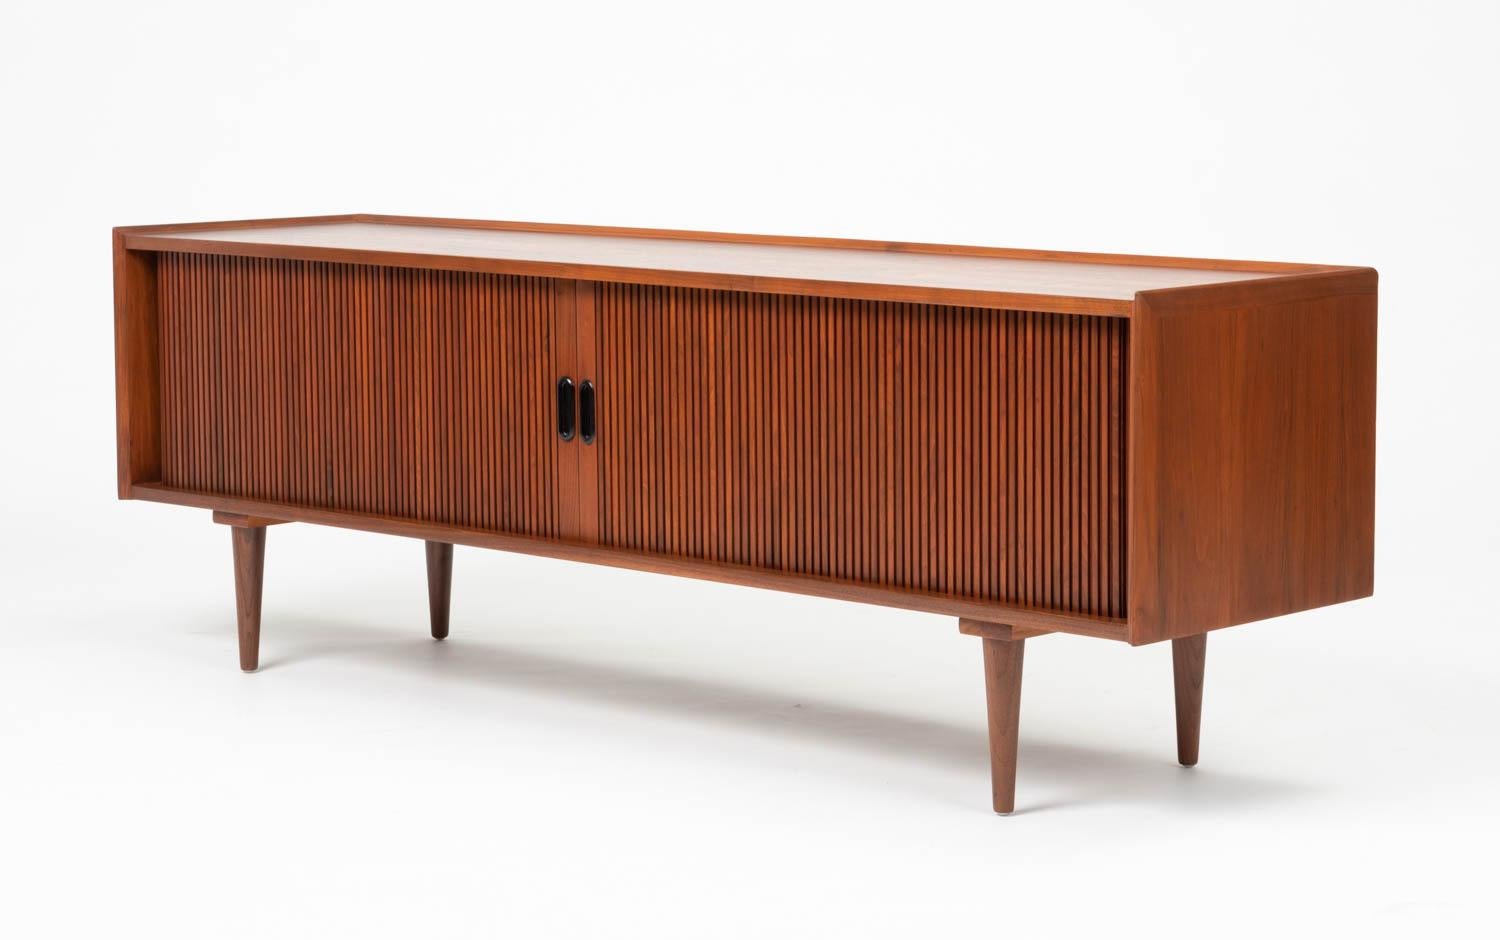 American made walnut credenza designed by Merton L. Gershun for Dillingham features two tambour doors that open to expose three multicolored drawers flanked by divided cabinets for record storage. 

Condition: Professionally refinished.